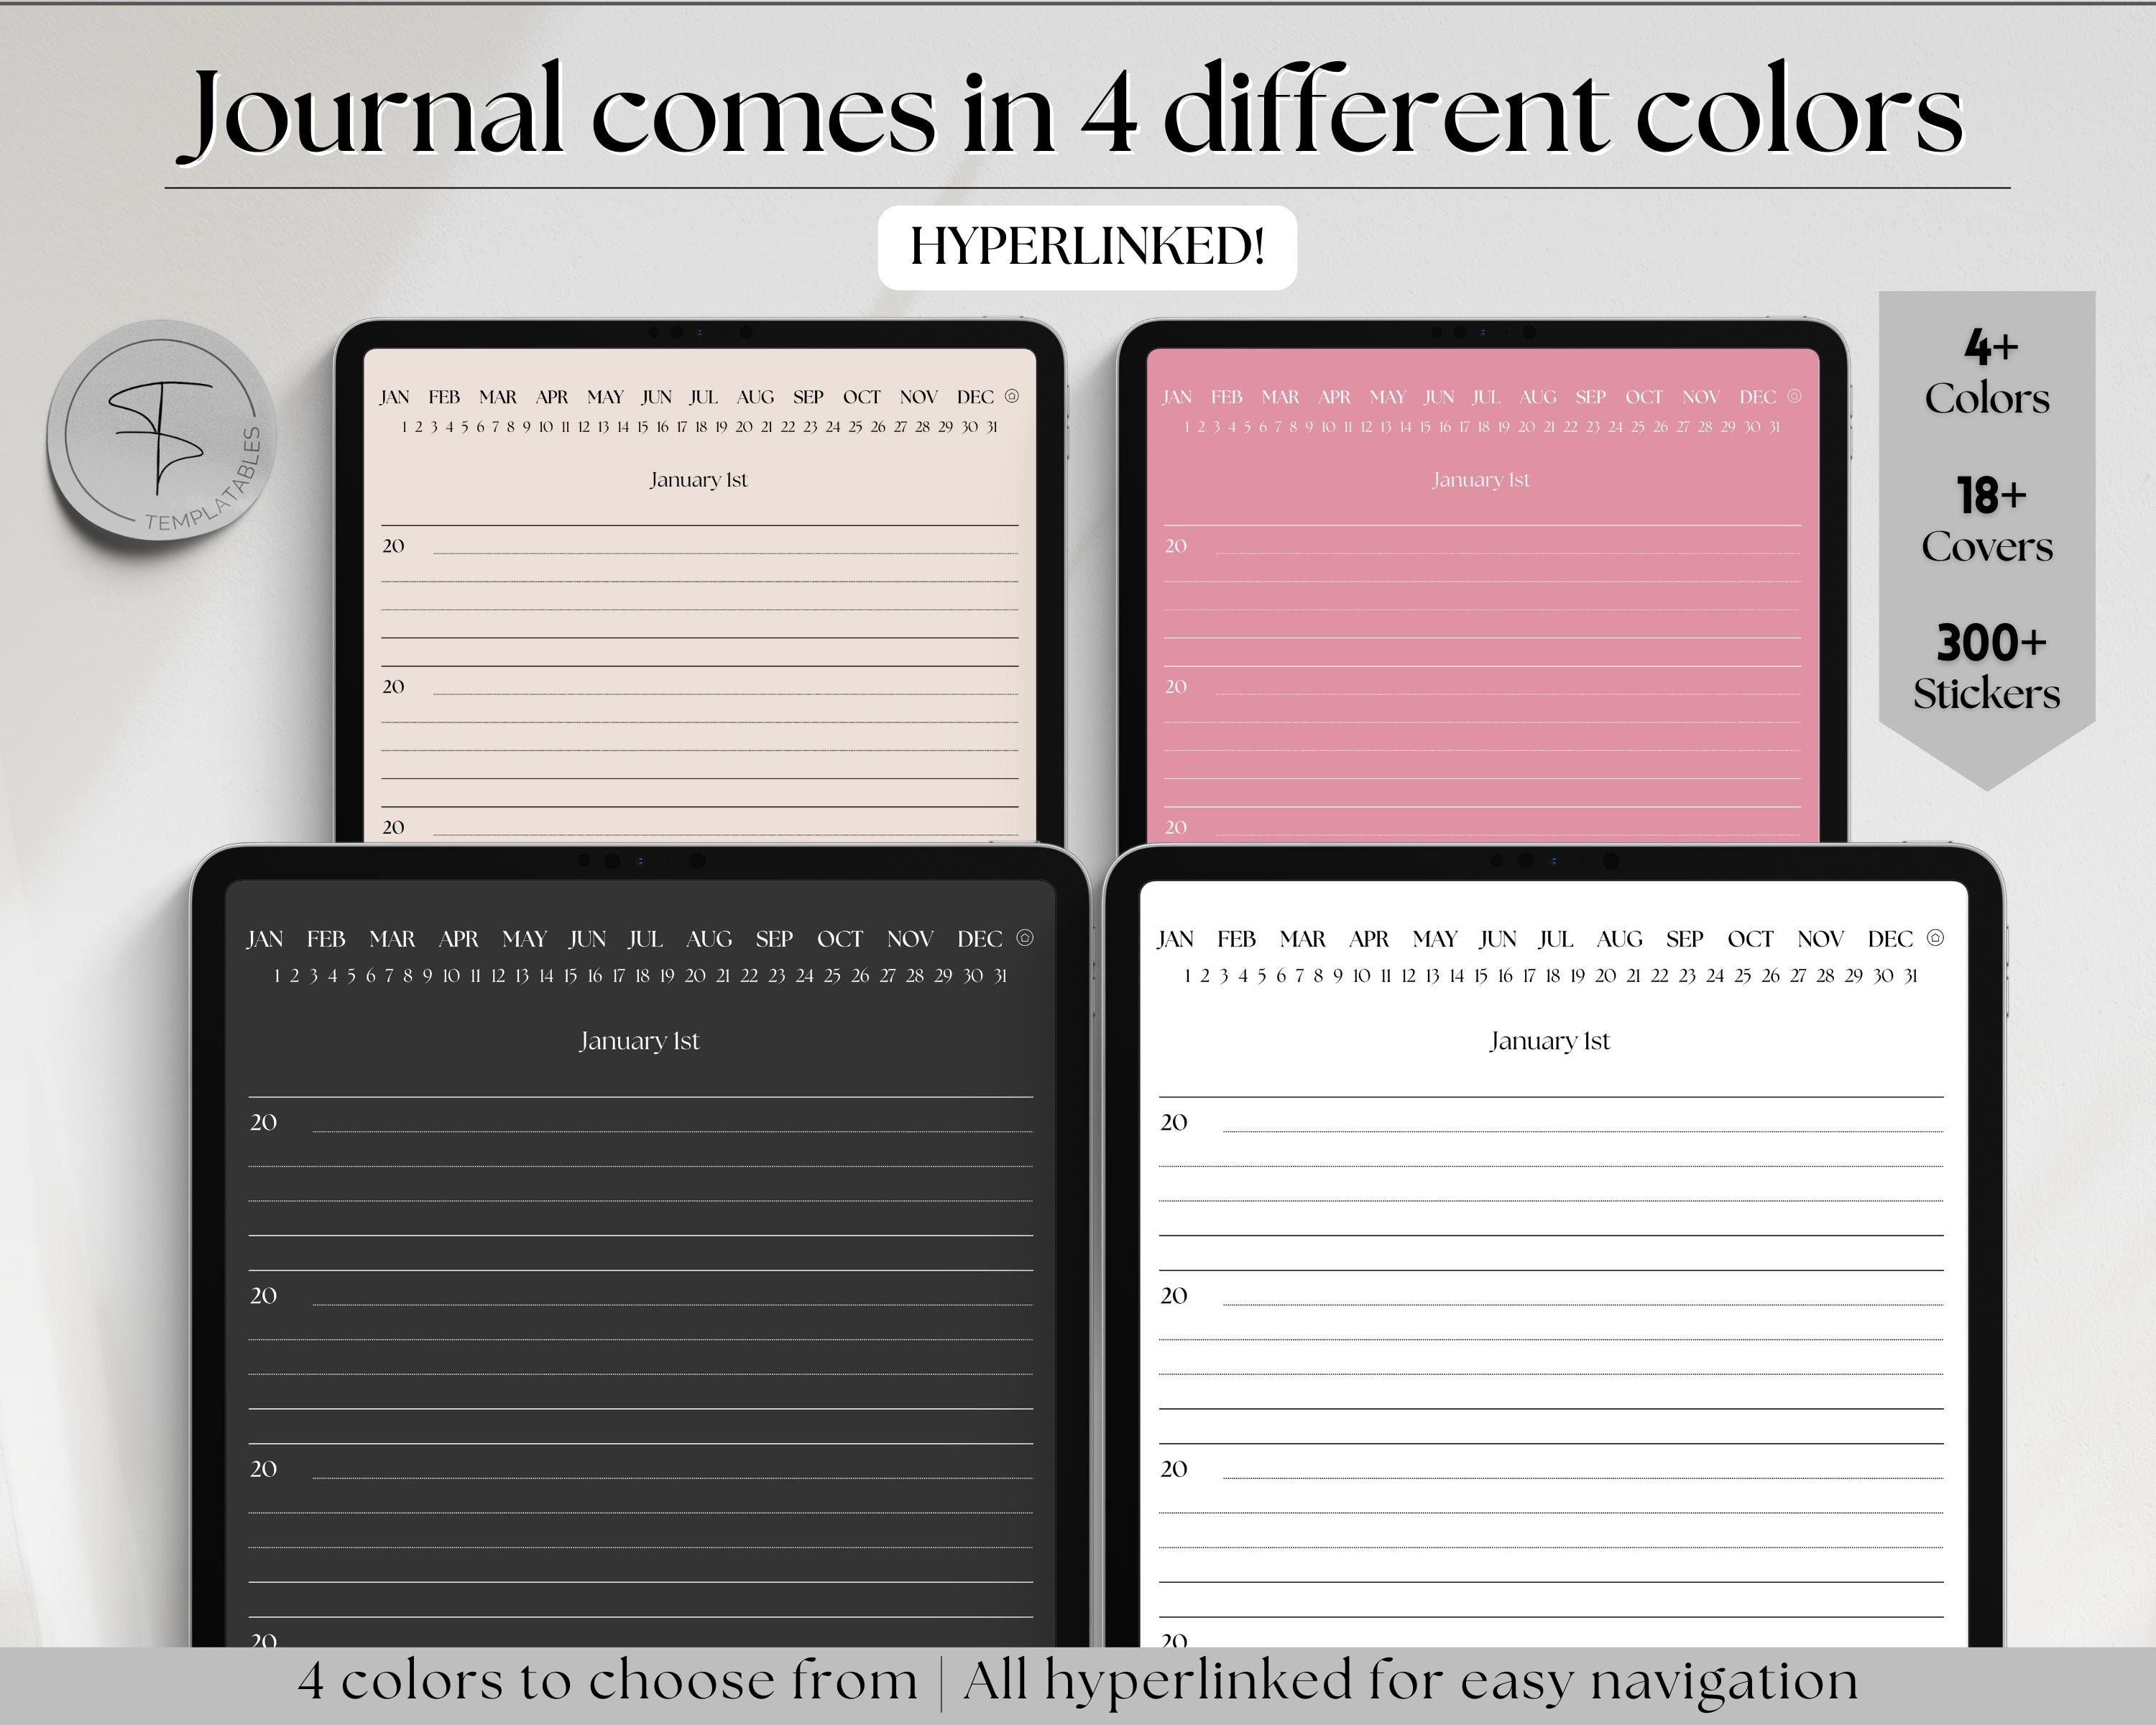 One Line a Day Digital Daily Journal, 5 Year Journal, Goodnotes iPad  Notebook, Hyperlinked Digital 365 Diary, Stickers & Covers, Minimalist 